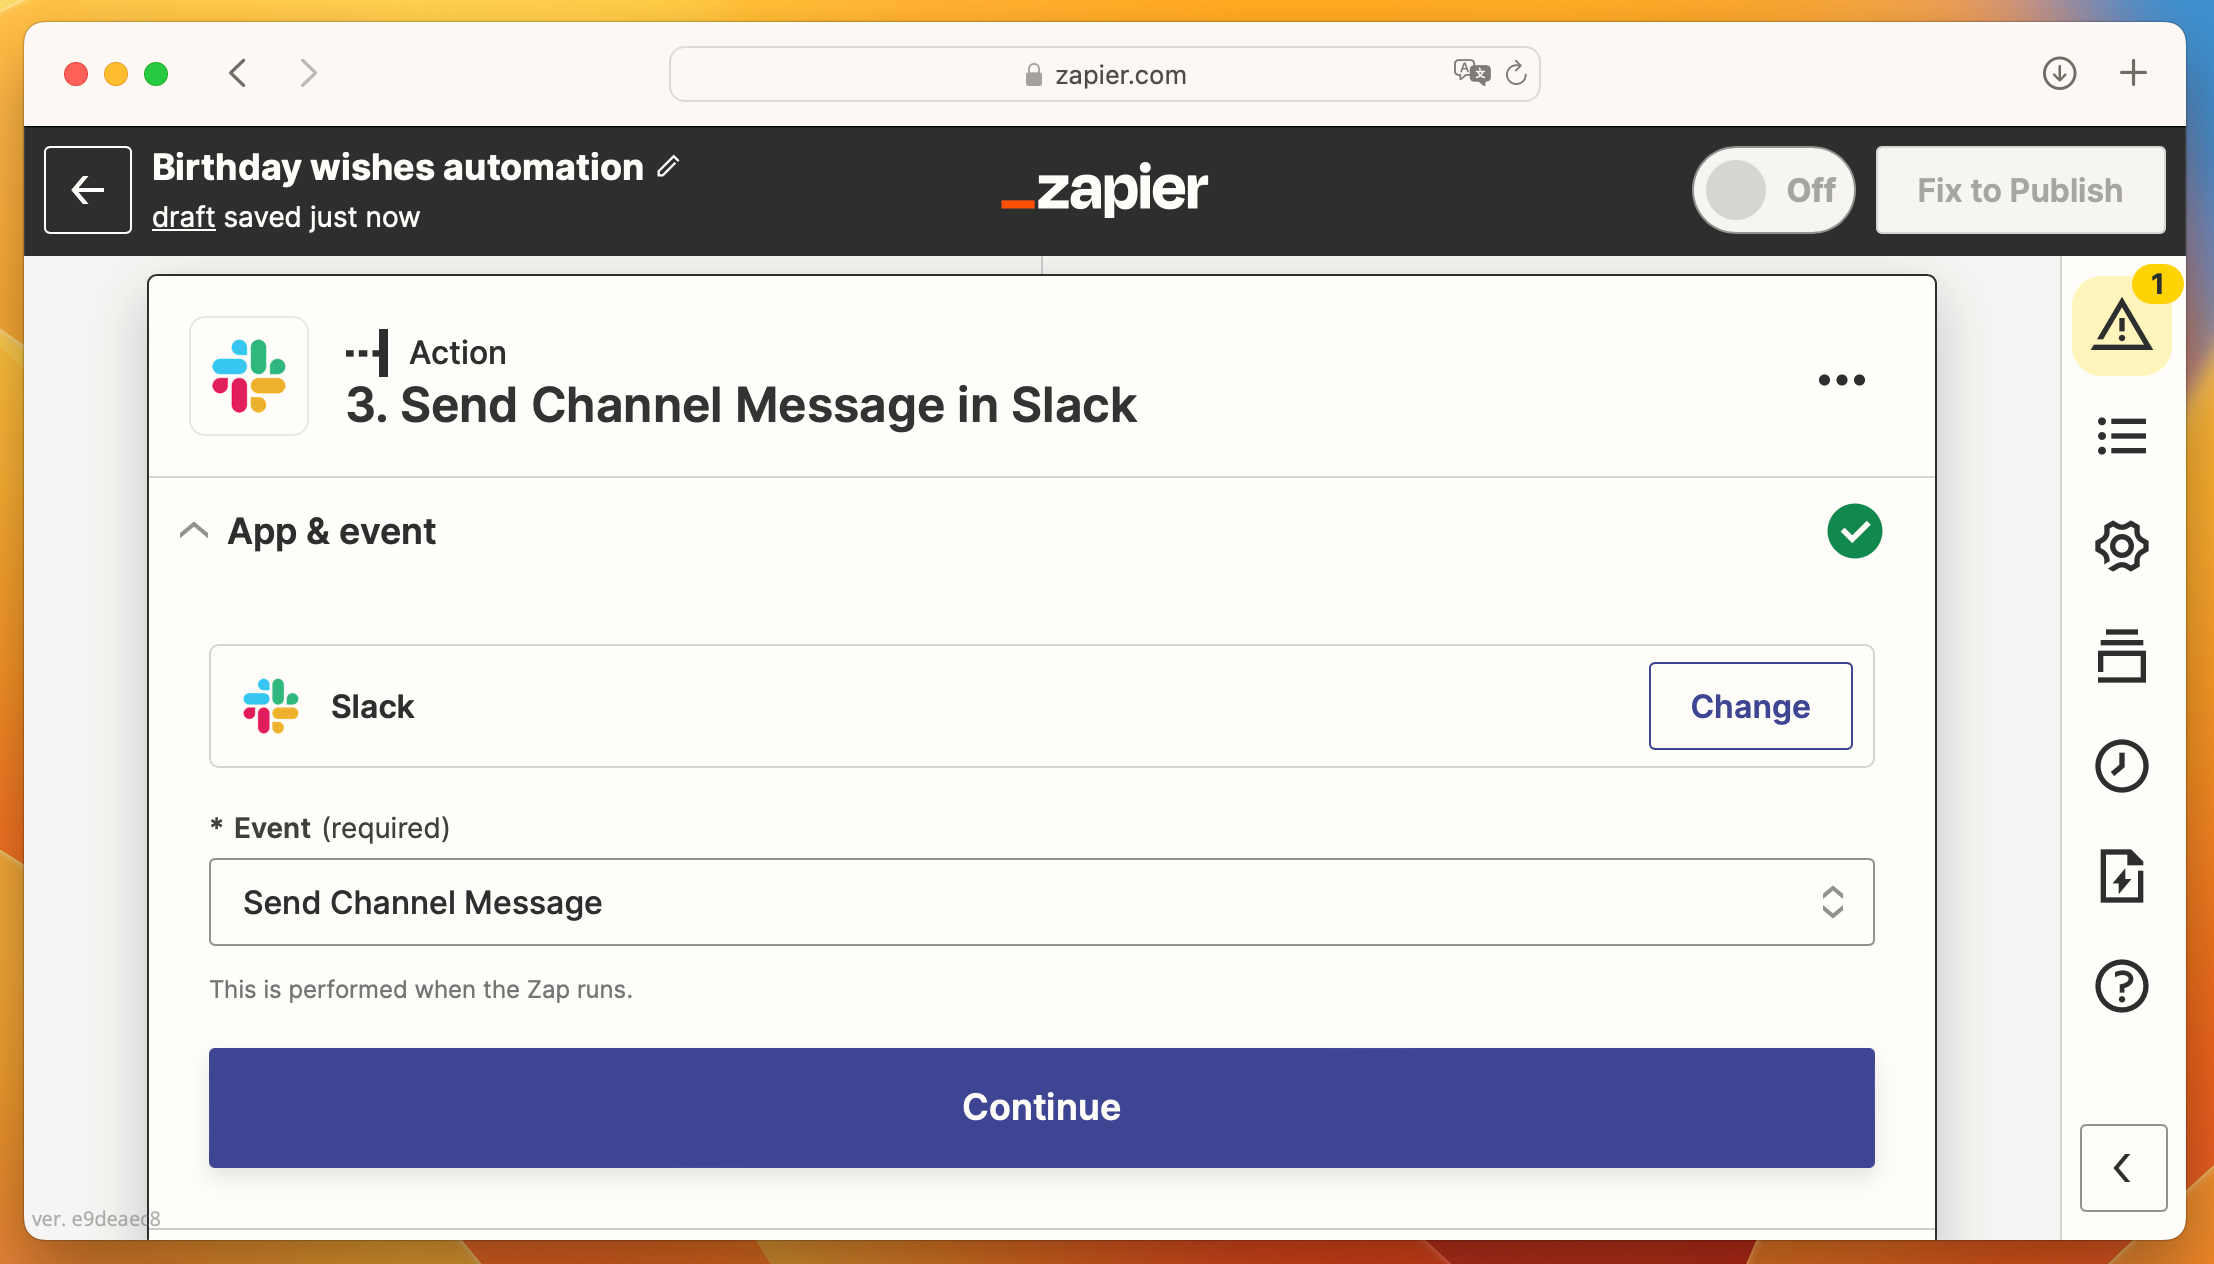 Setting up Slack as action in Zapier automation